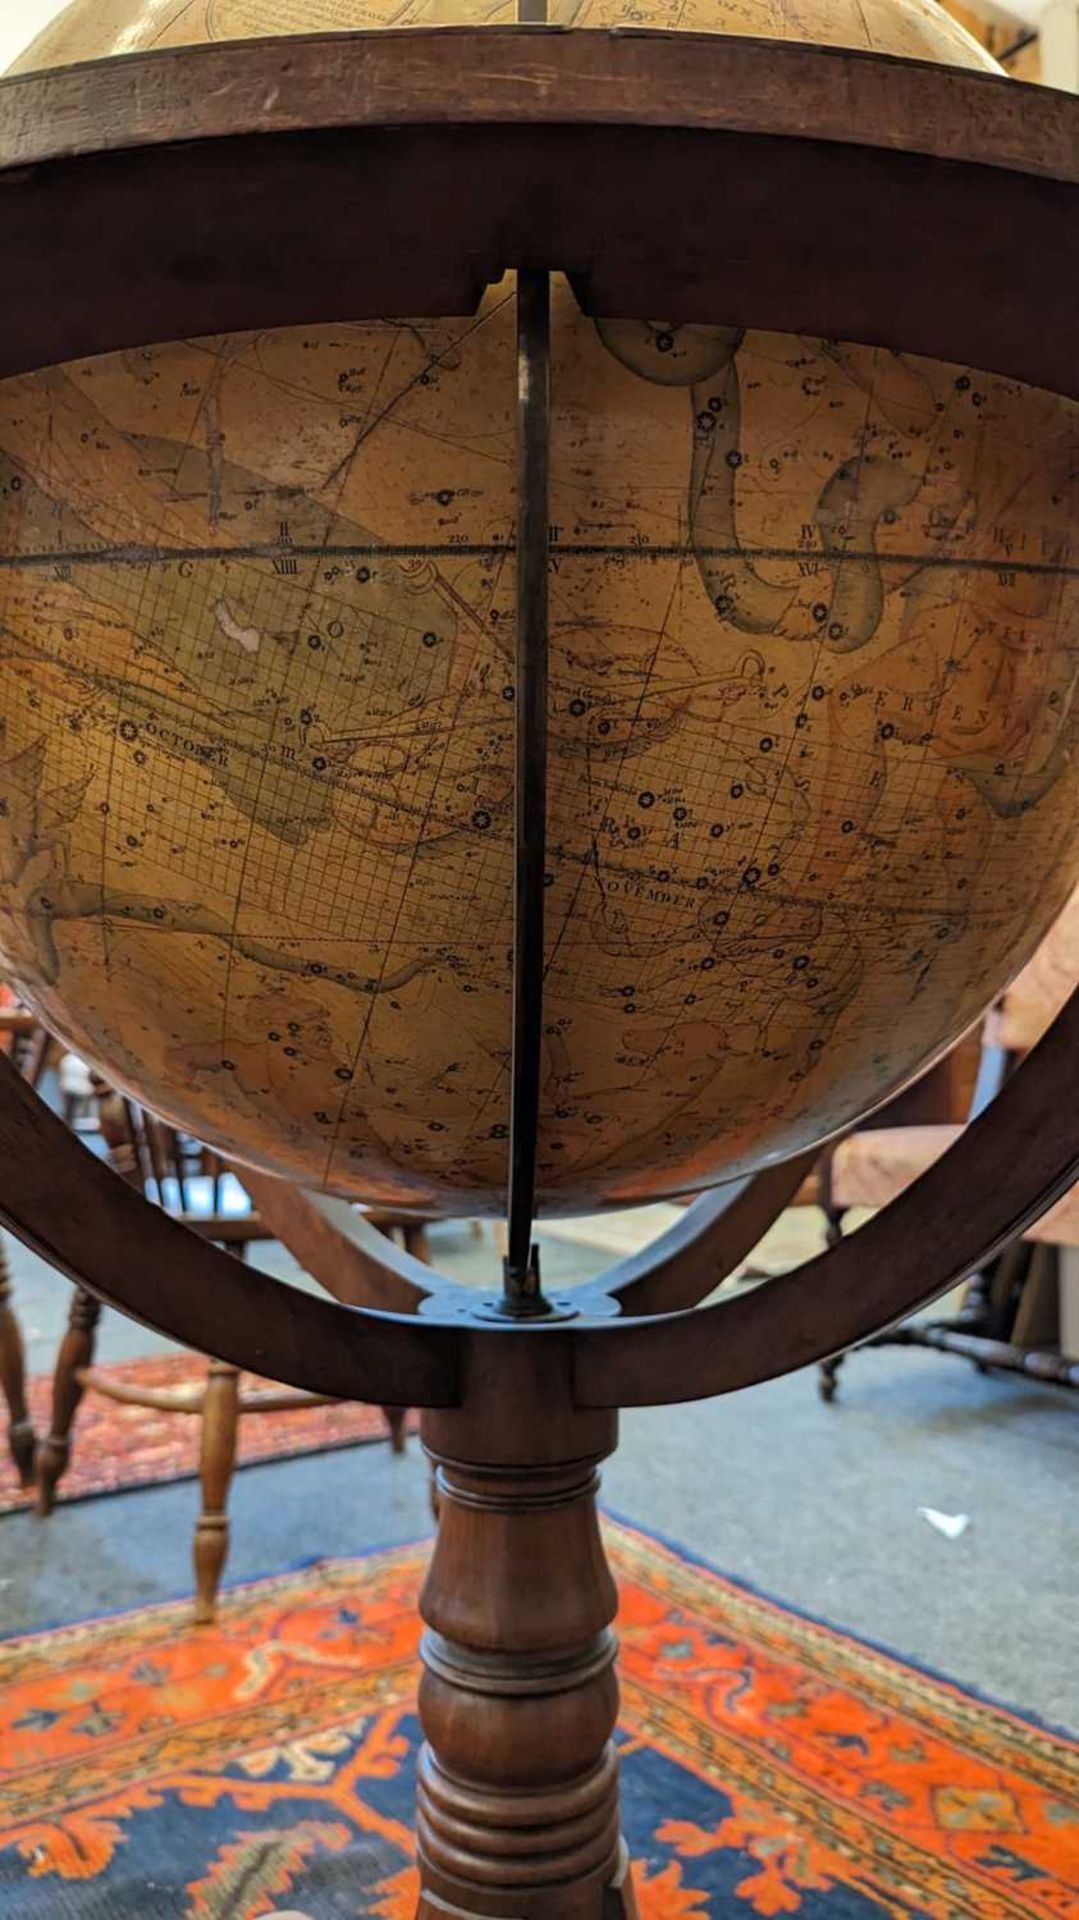 A large celestial library globe by J & W Cary, - Image 54 of 84